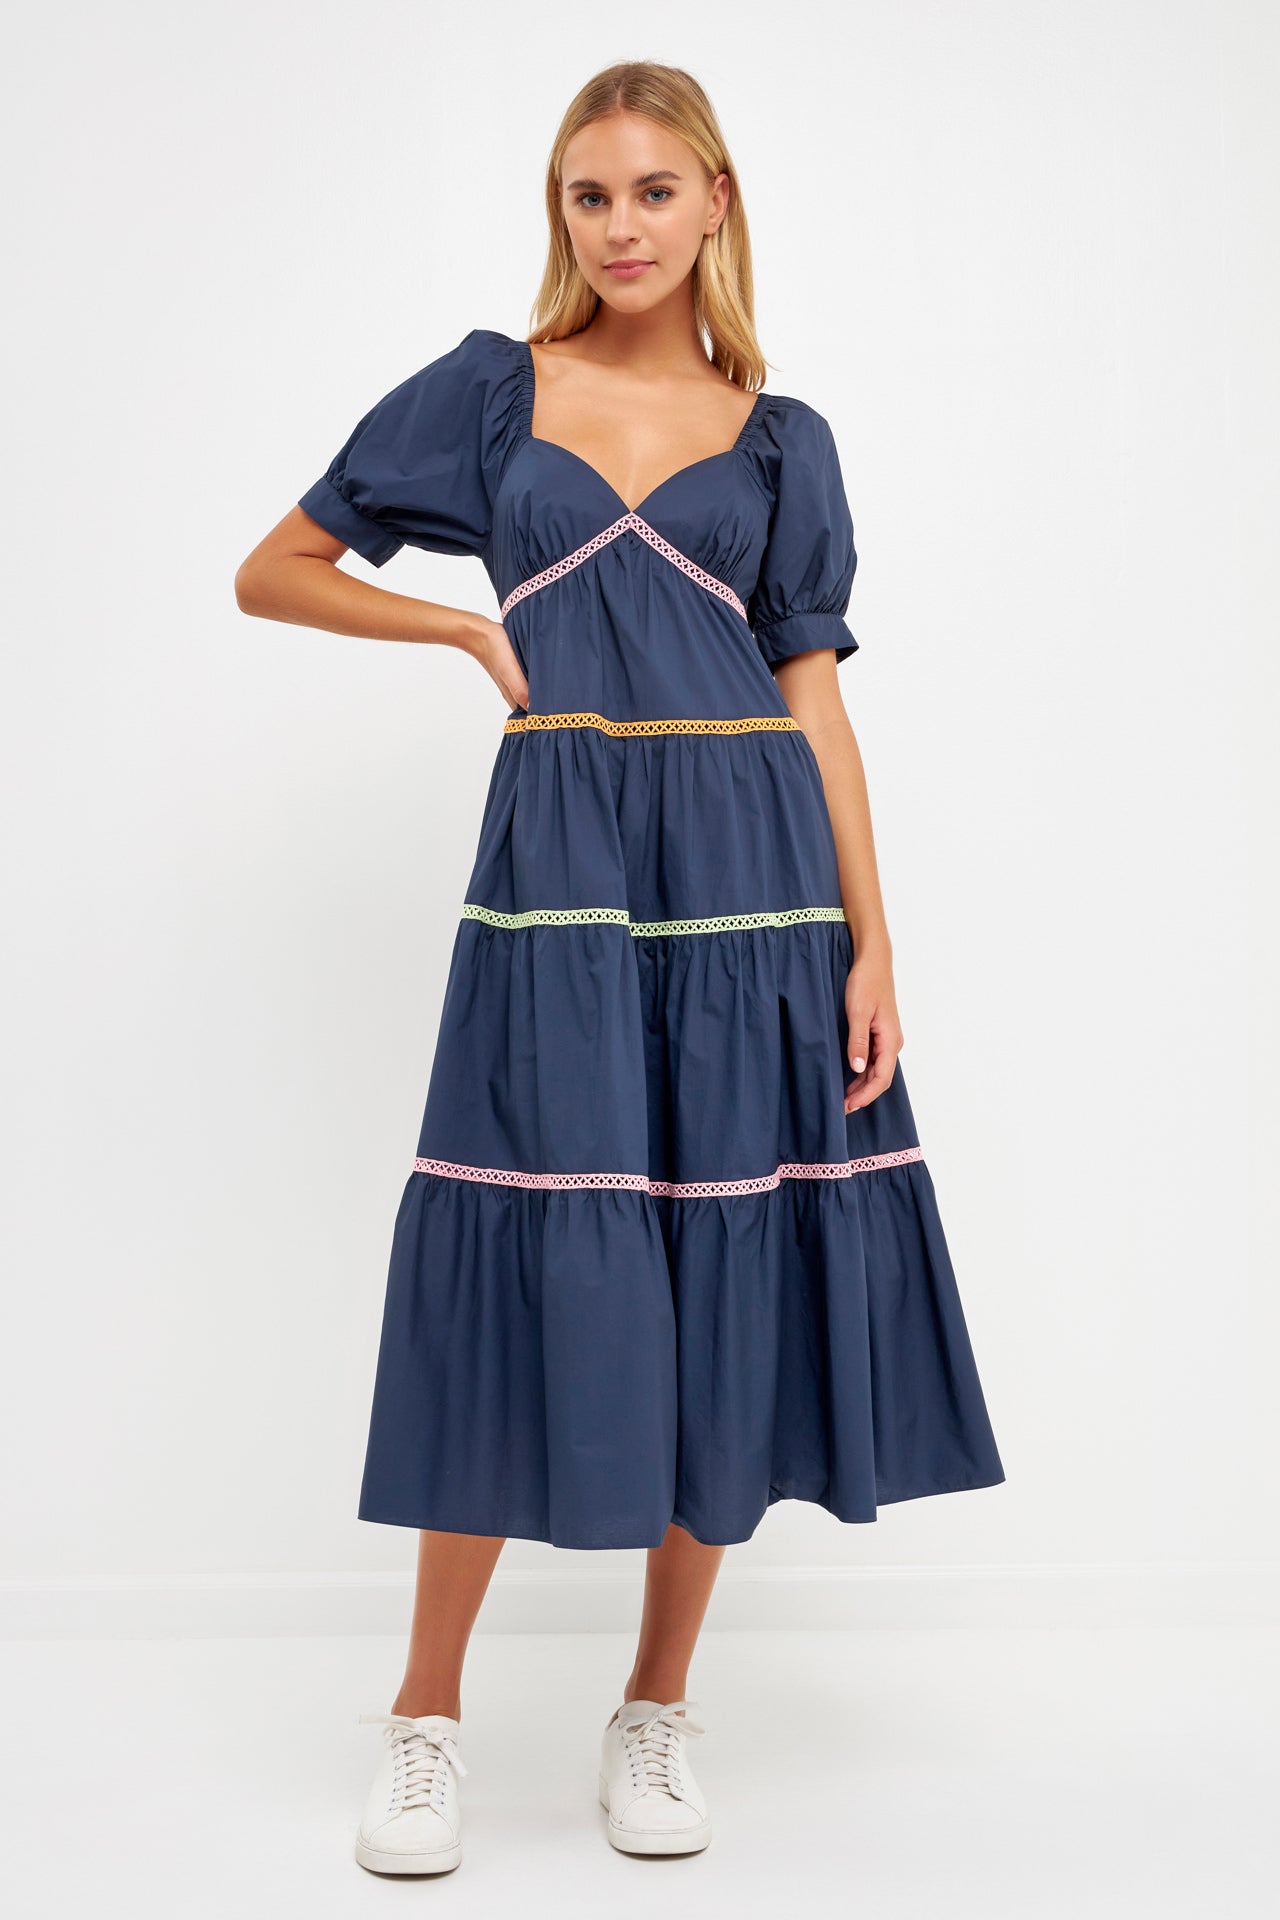 English Factory Annie Midi Dress- Navy, short puff sleeves, ribbon trimmed, sweetheart neckline, tiered